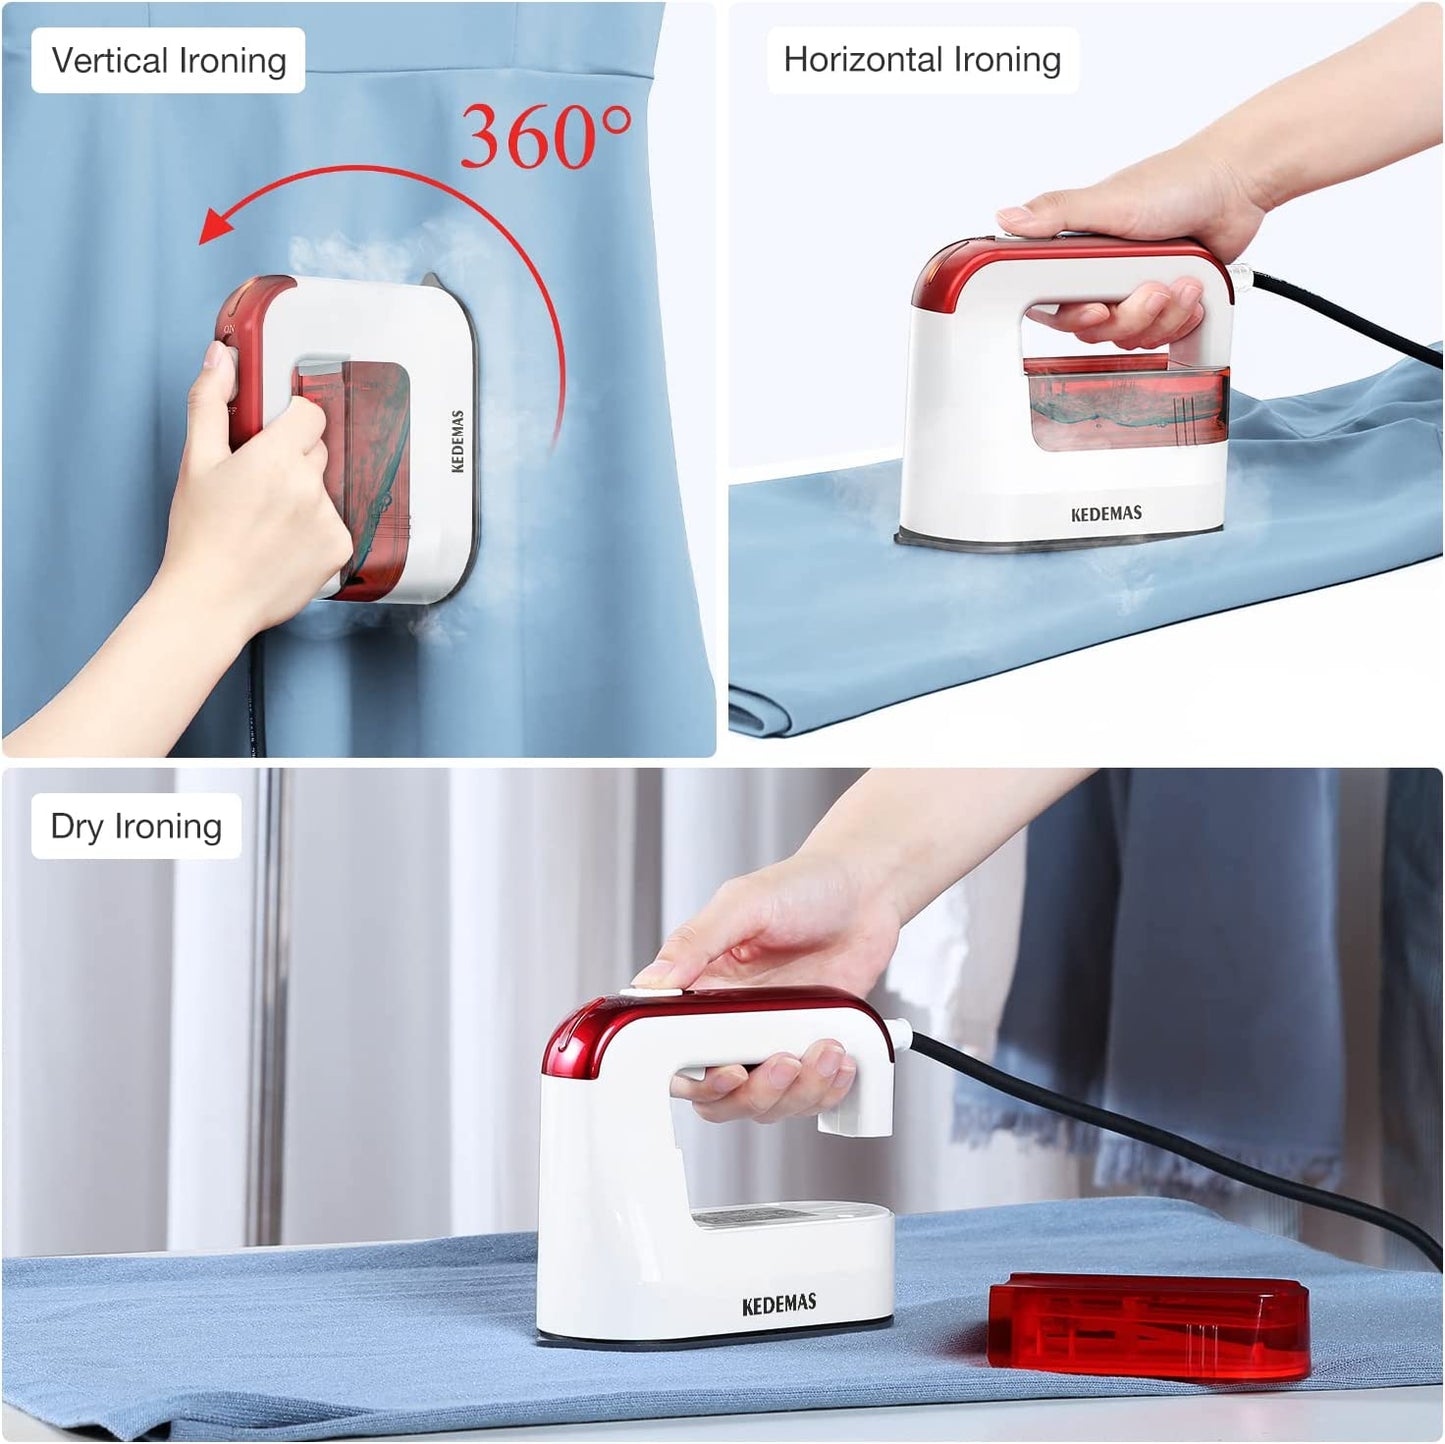 Travel Steamer Iron for Clothes,  1300W Powerful Mini Handheld Garment Fabric Iron, Horizontal and Vertical Ironing 4 in 1, 40S Fast Heat-Up, Portable Compact Steam for Traveling and Home, Red